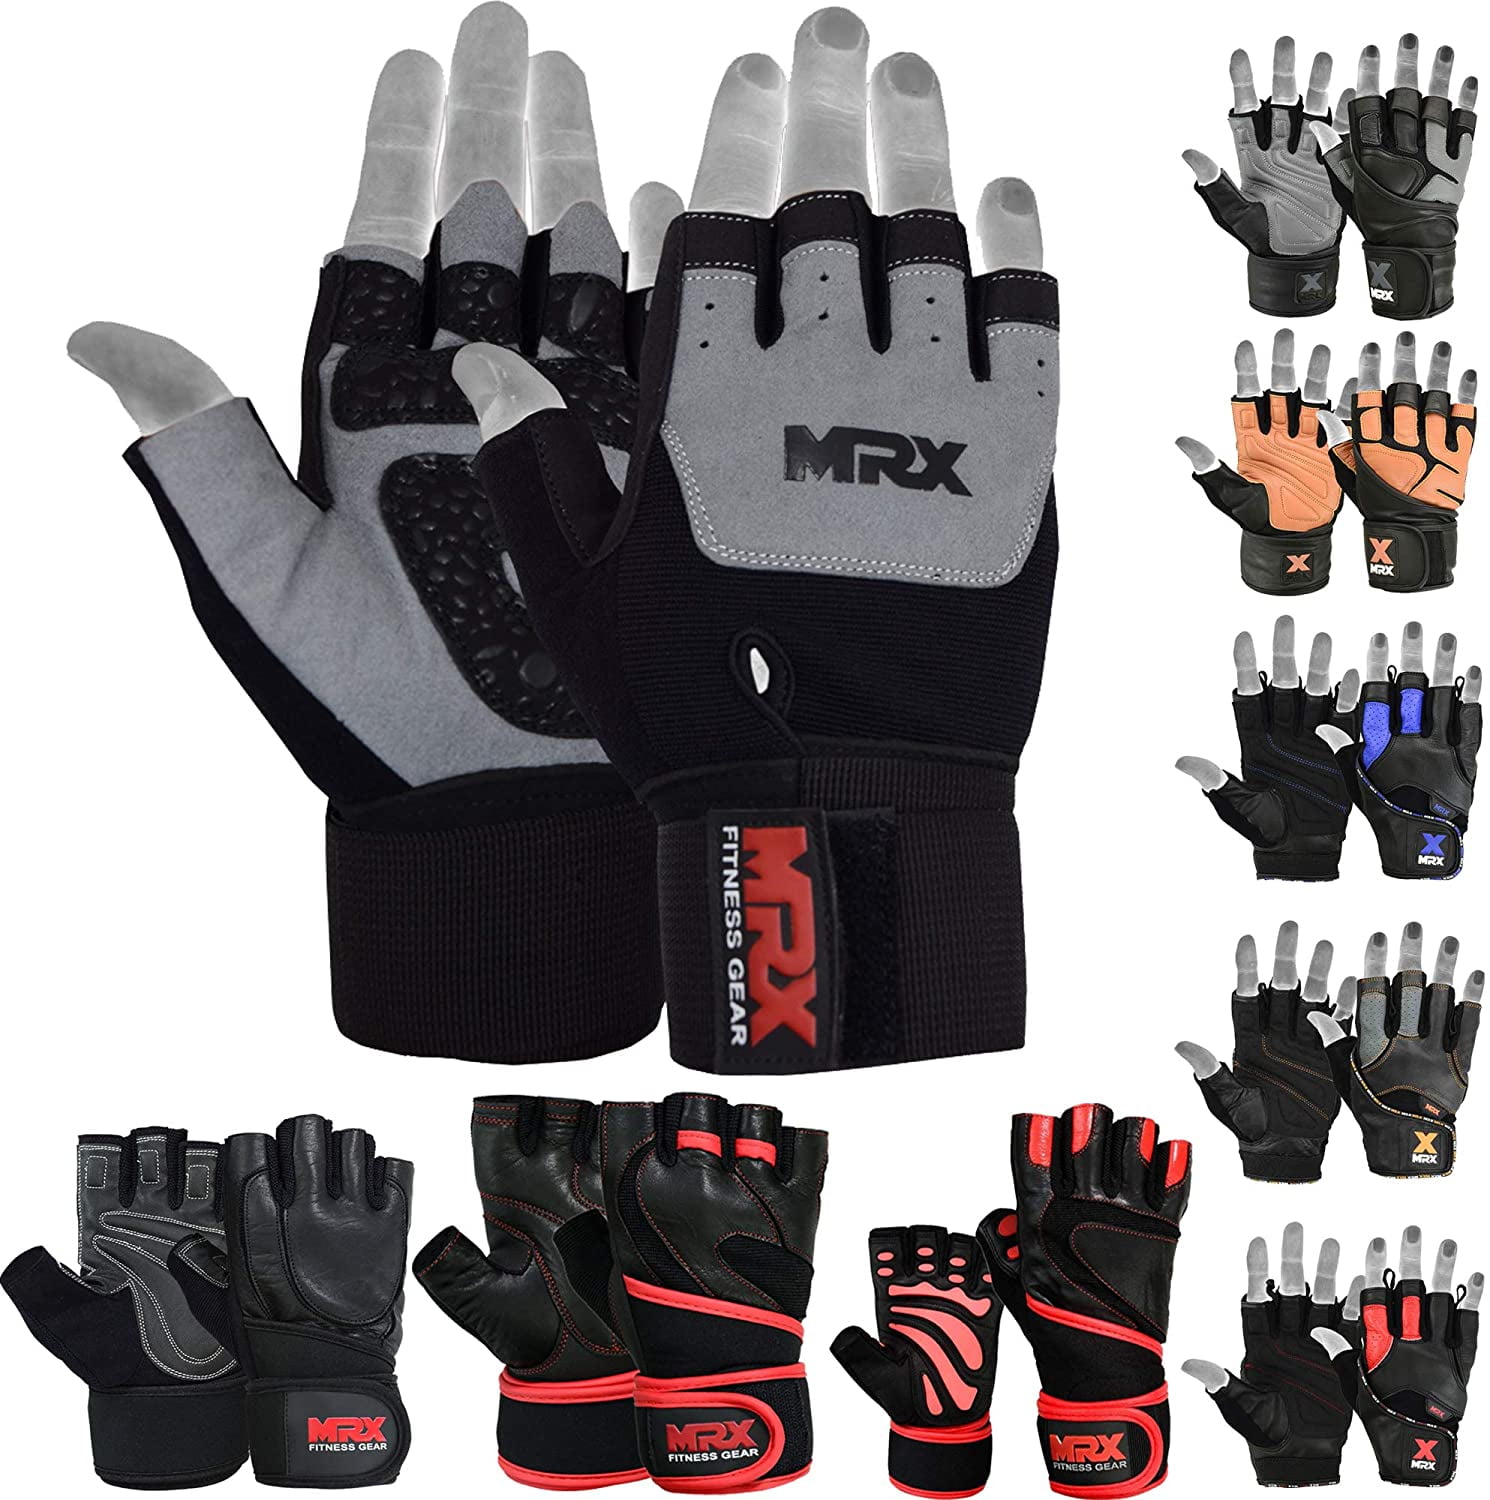 Body Building Training Gloves TurnerMAX Genuine Cowhide Leather Gloves